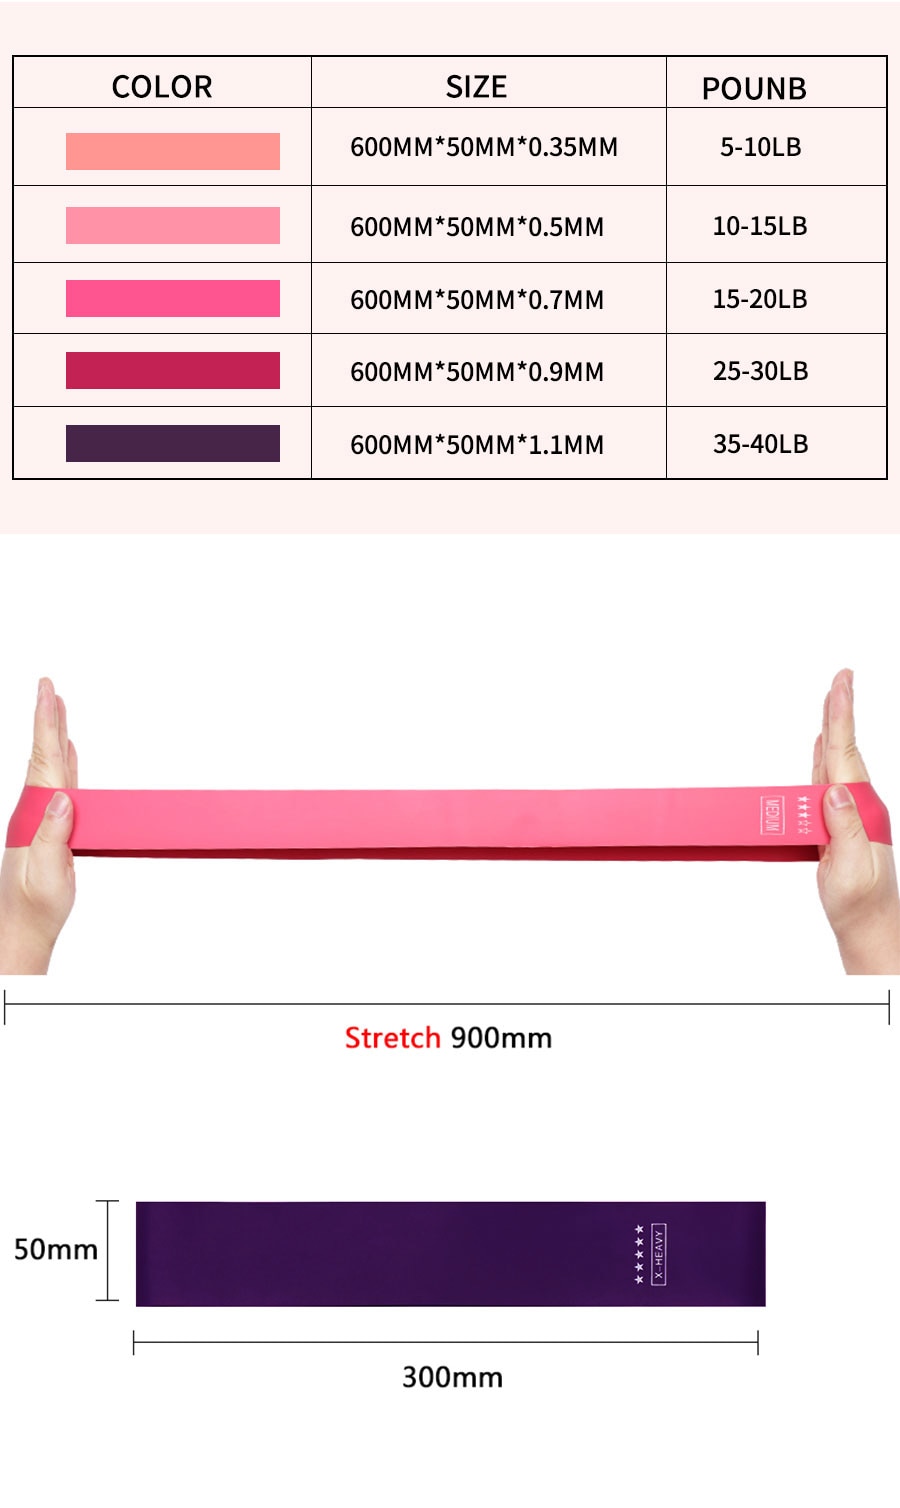 Bands for Legs and Butt Training Fitness Exercise Gym